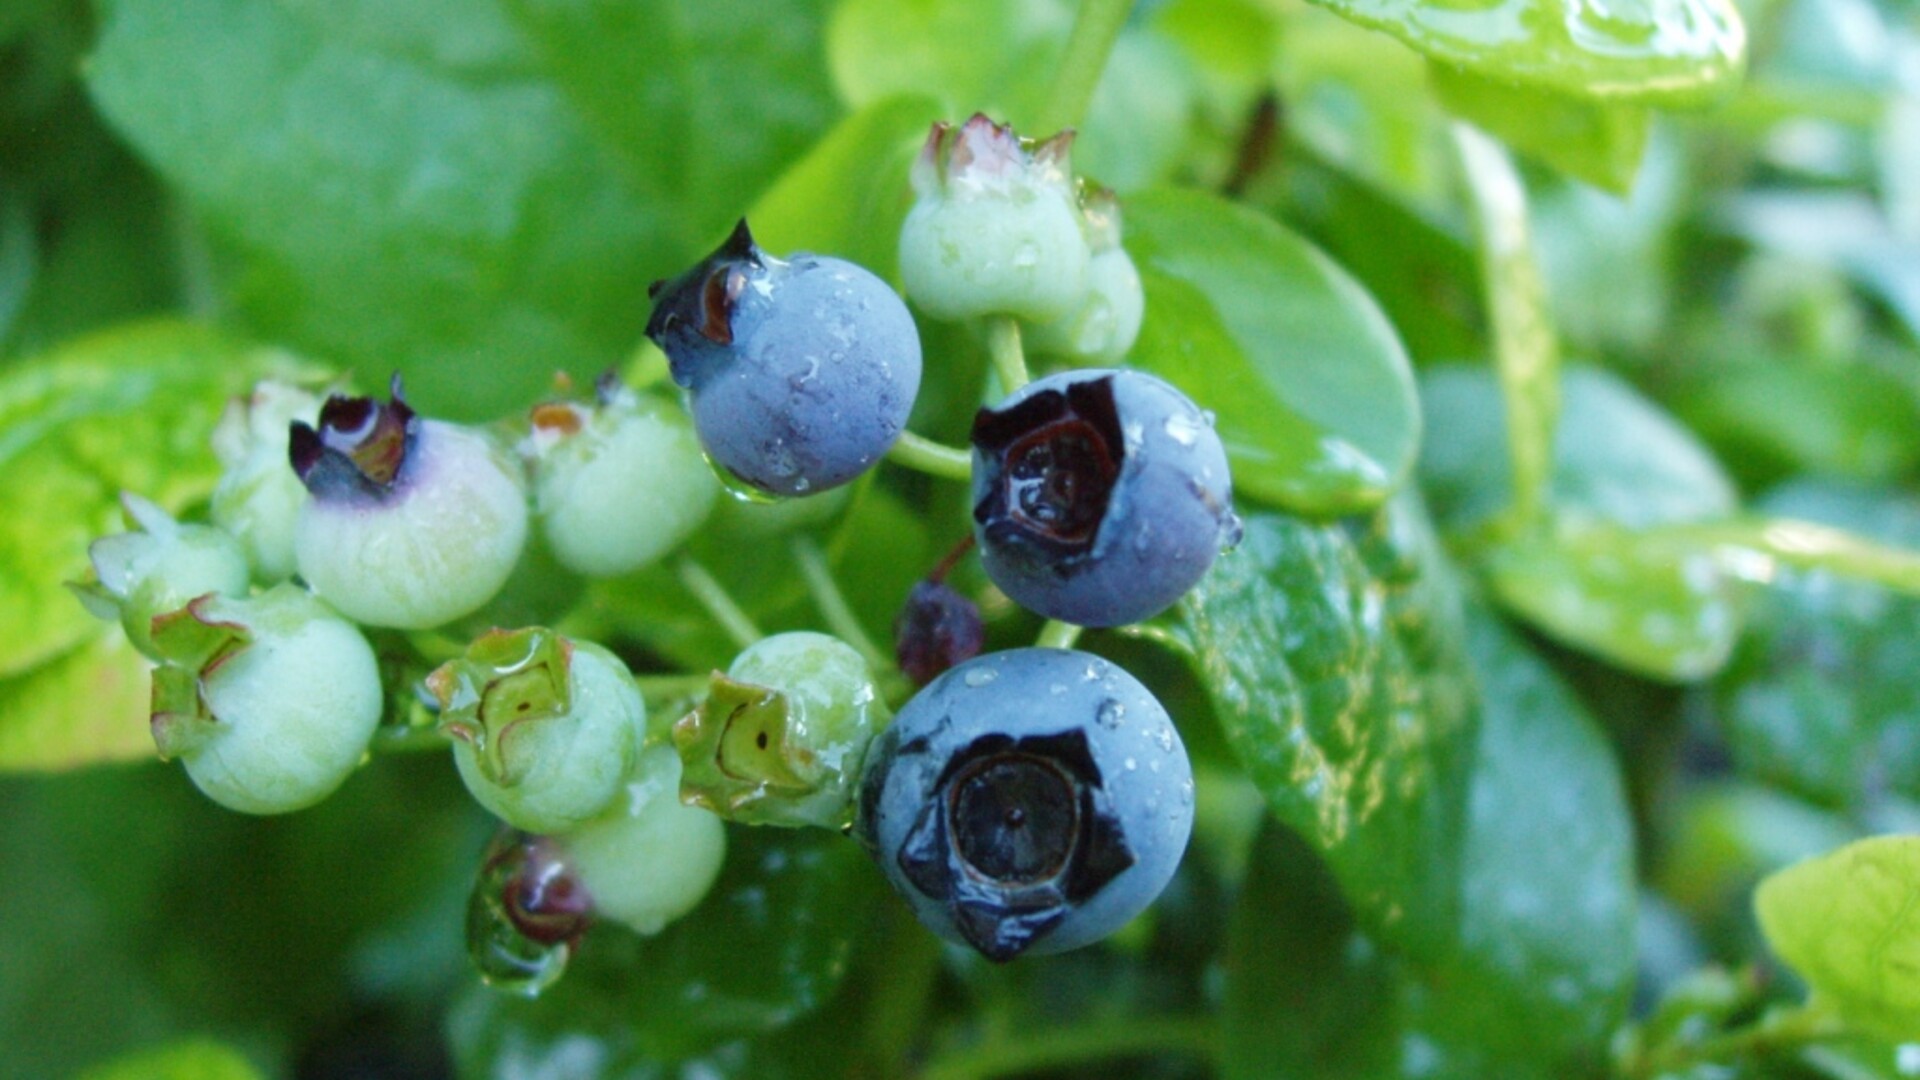 What's Happening to the Blueberries?